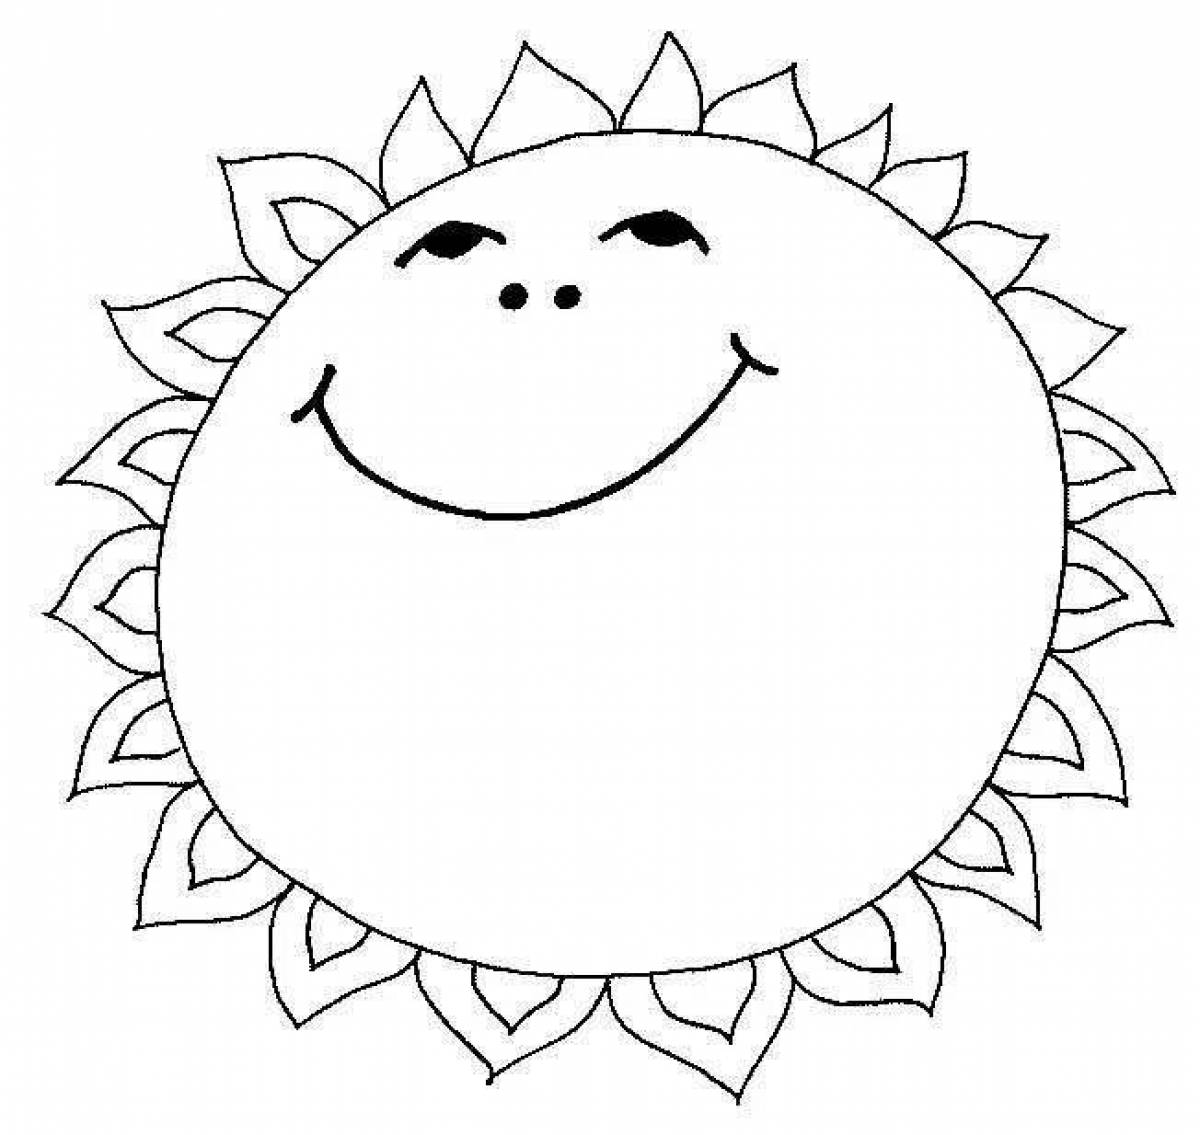 Shiny coloring picture of the sun